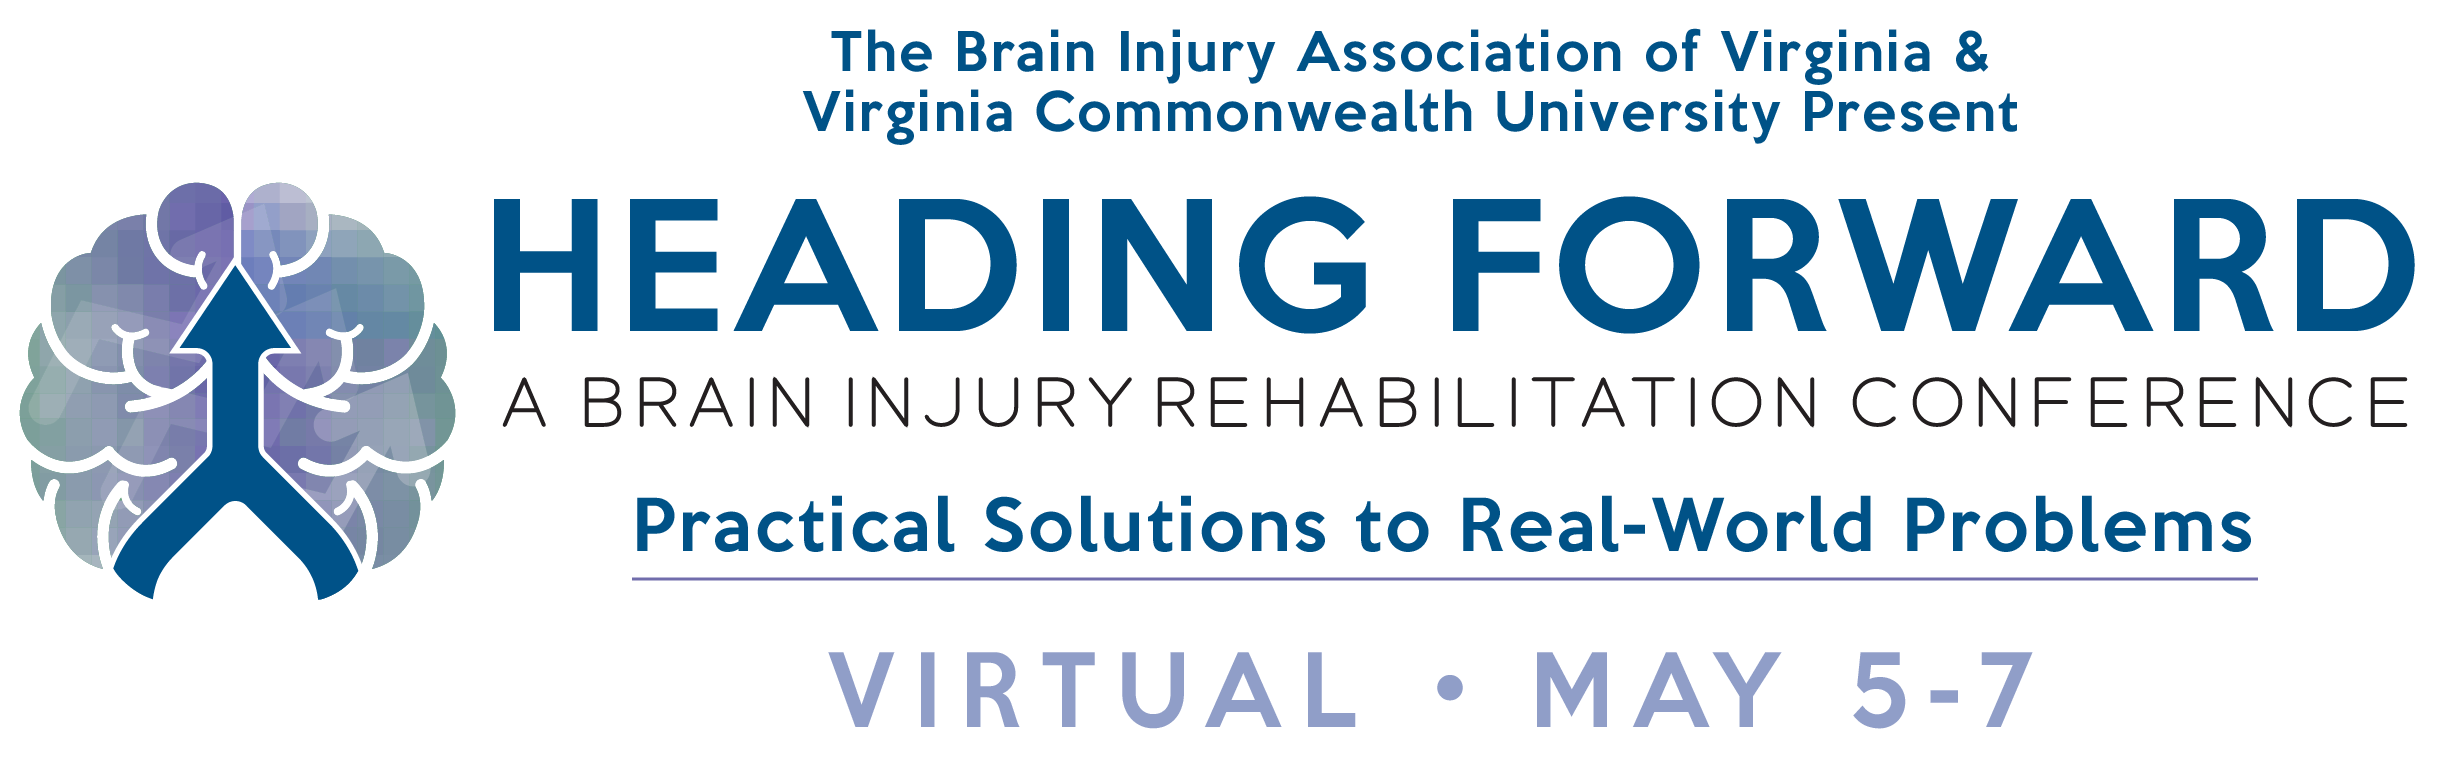 Brain Injury Association of Virginia and Virginia Commonwealth University Present Heading Forward: A Brain Injury Rehabilitation Conference. Practical Solutions to Real-World Problems. Virtual. May 5-7